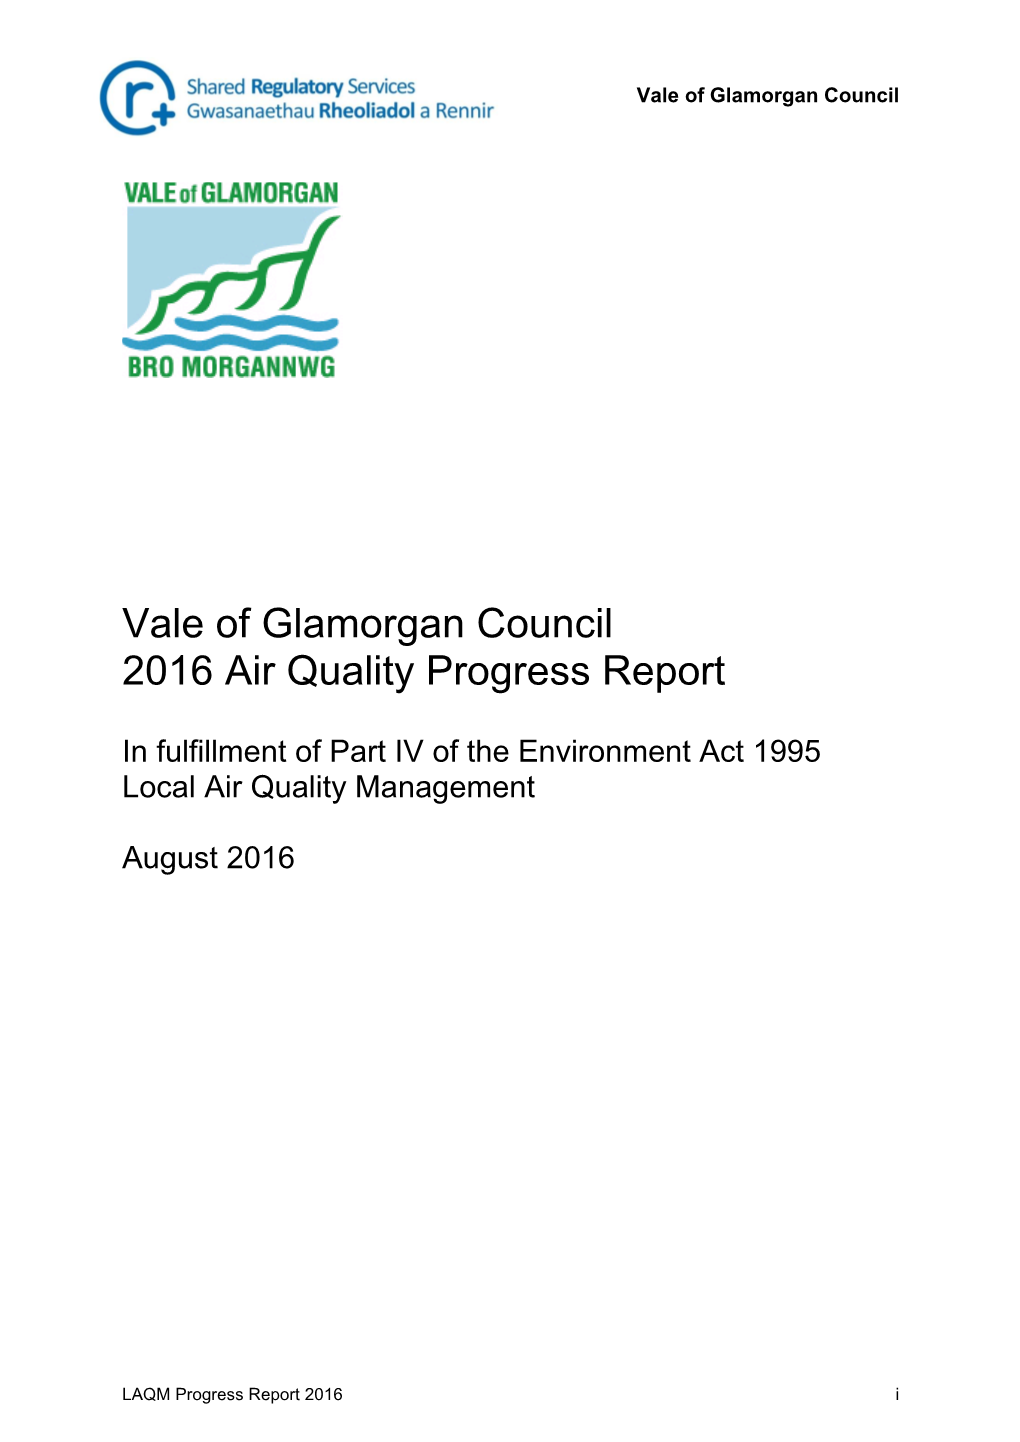 16.09.21 Air Quality Progress Report 2016 May 2016 Revised LTP And